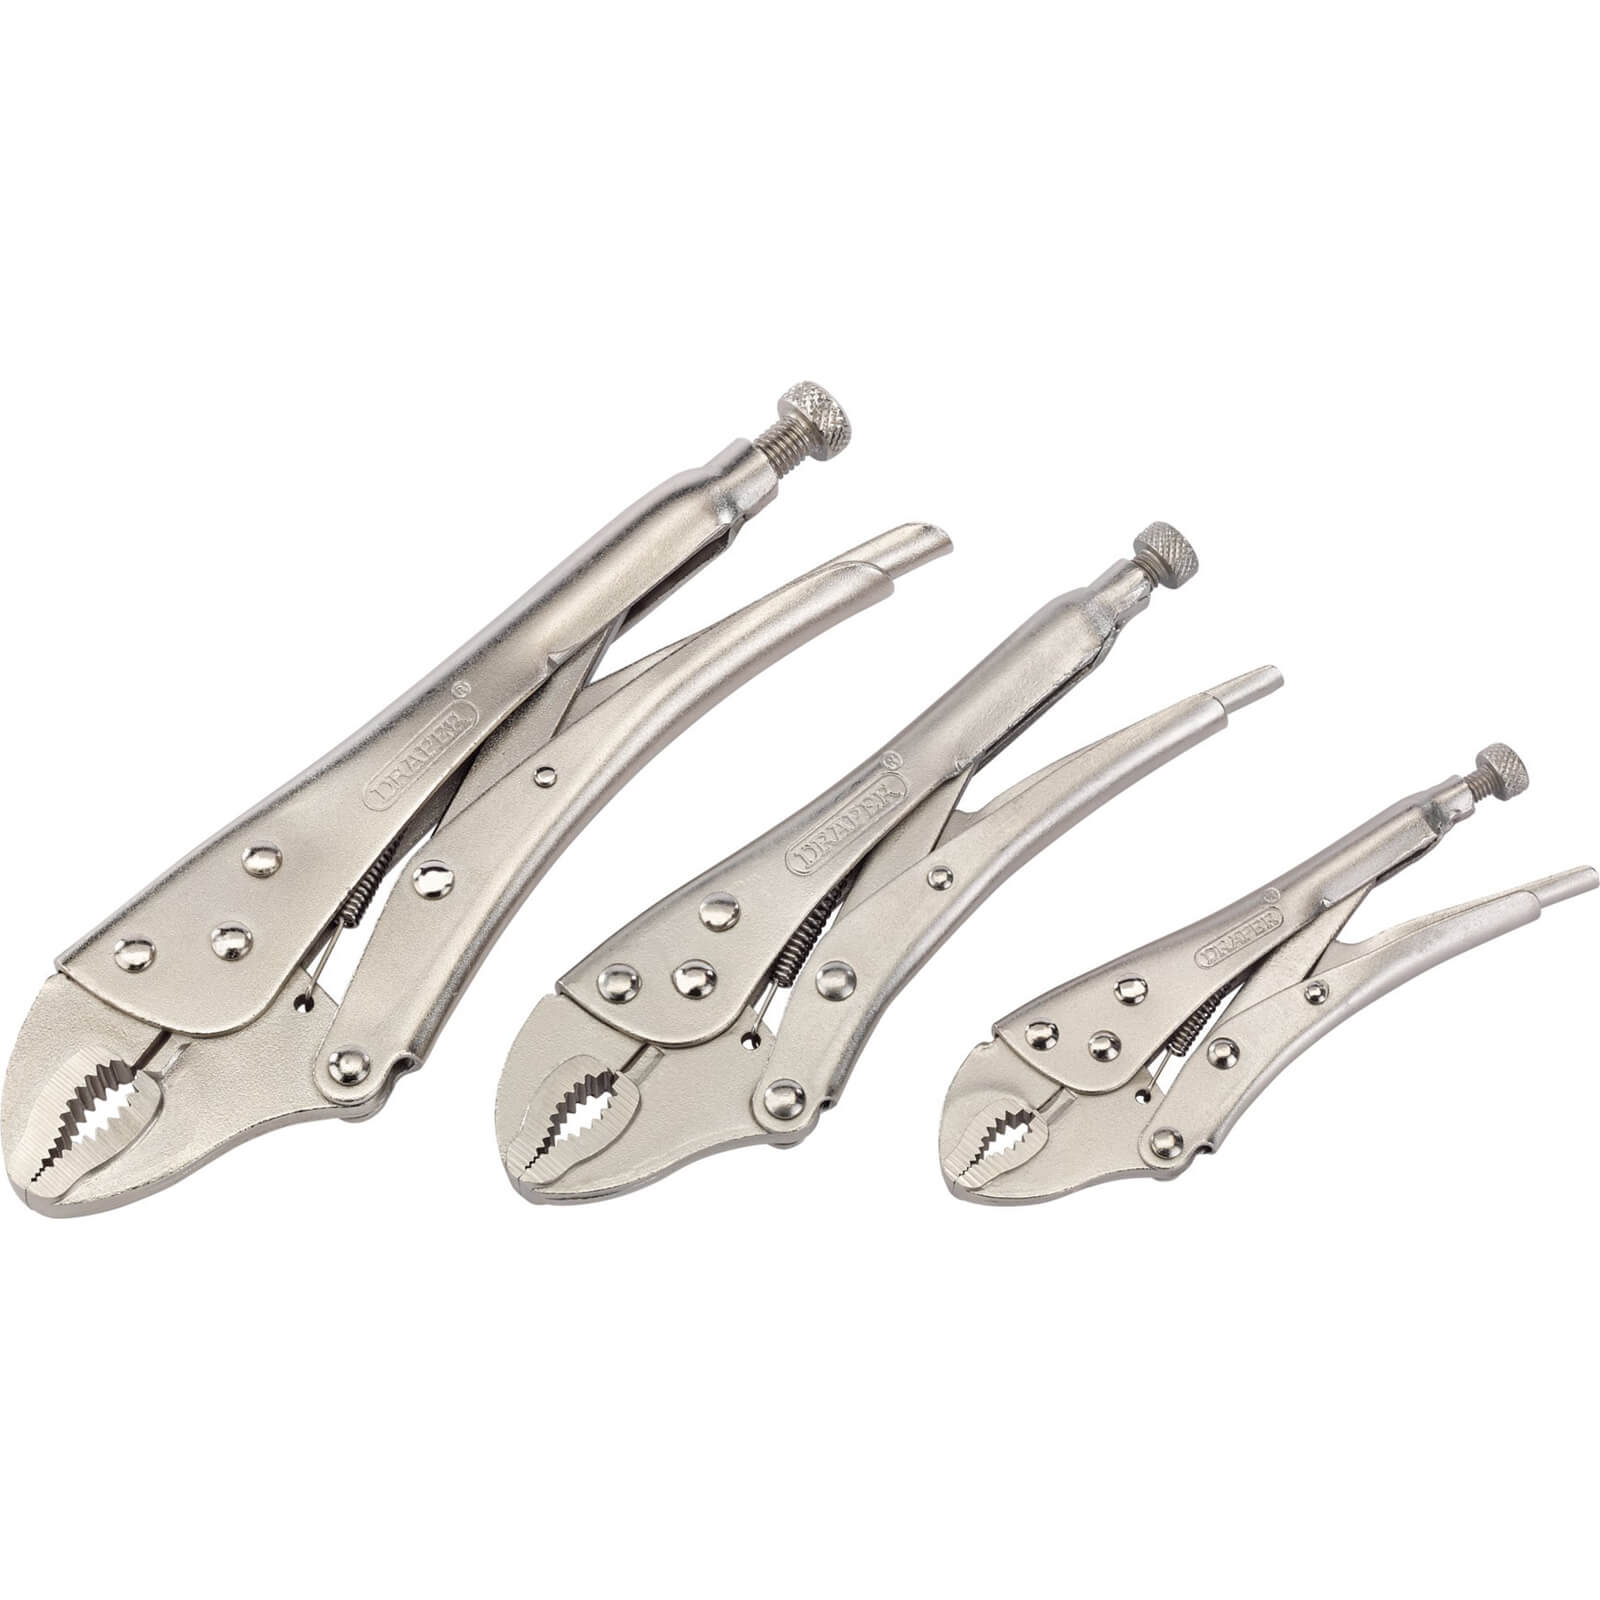 Image of Draper 3 Piece Curved Jaw Self Grip Plier Set